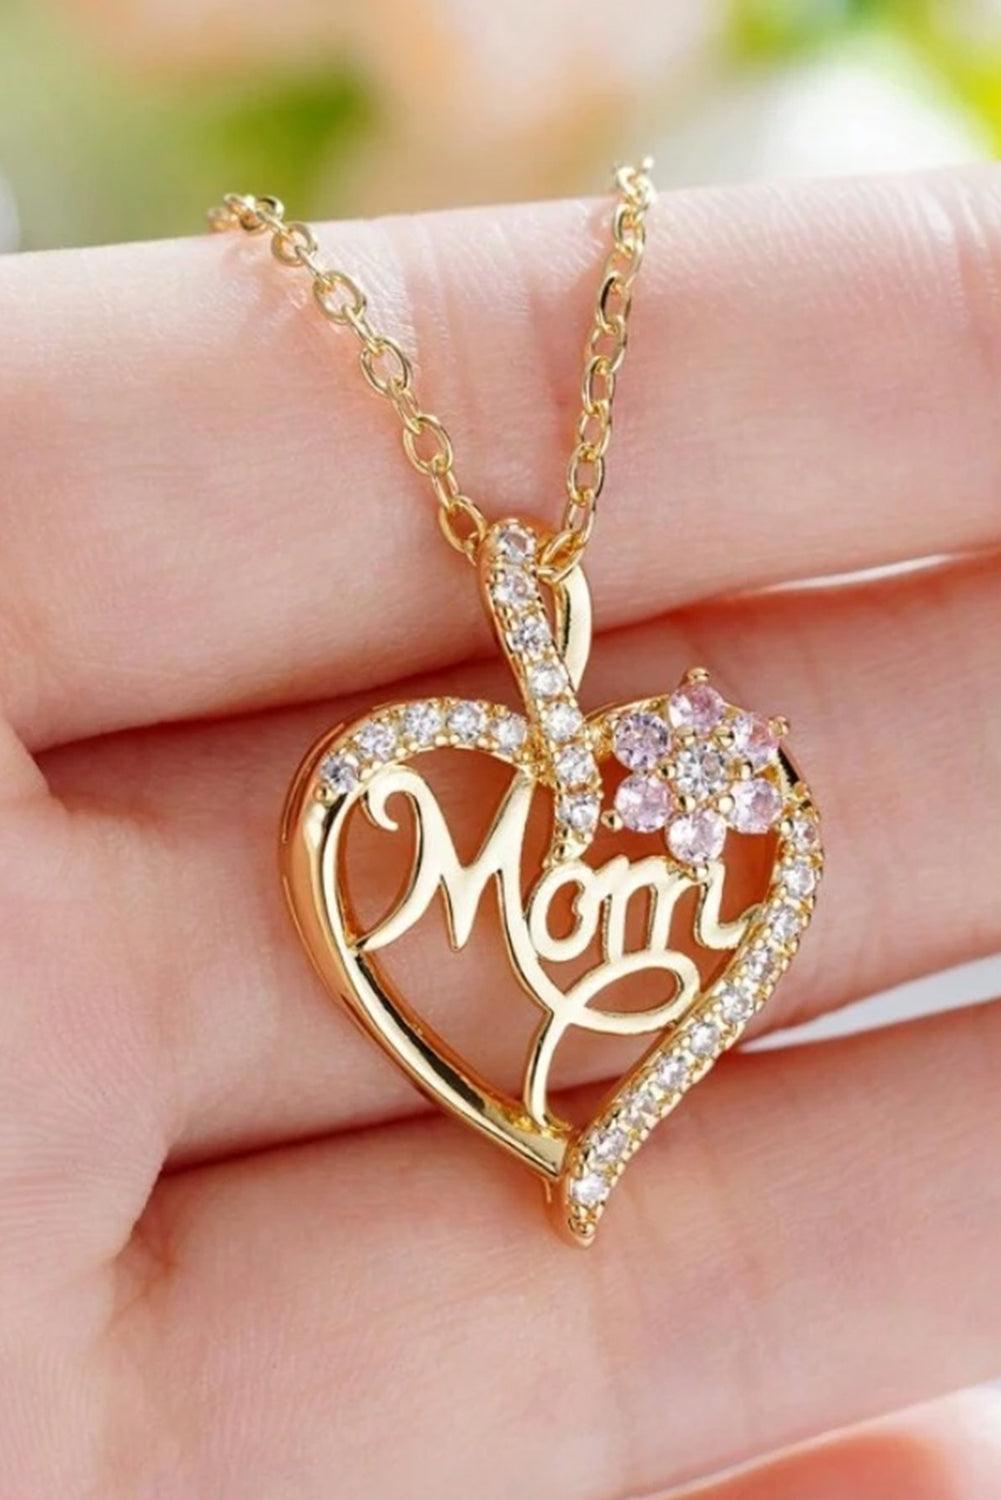 Gold Mom Rhinestone Flower Hollow-out Heart Necklace